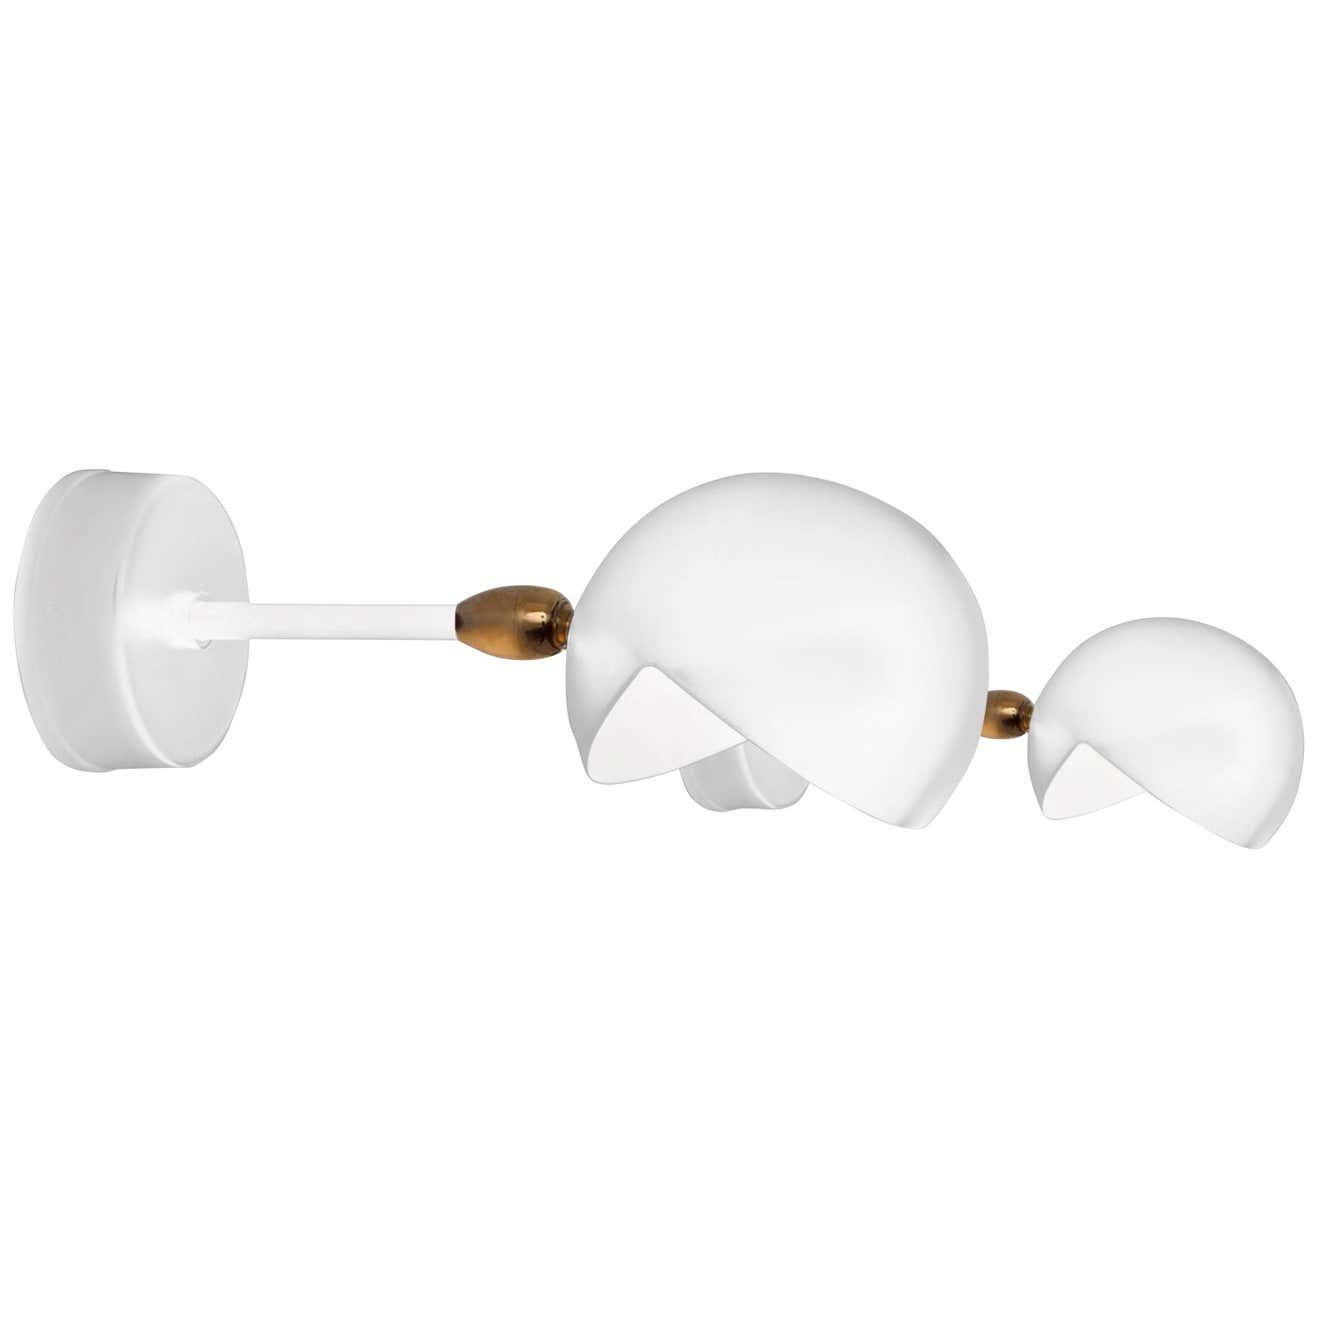 Contemporary Serge Mouille Mid-Century Modern White Eye Sconce Wall Lamp Set For Sale